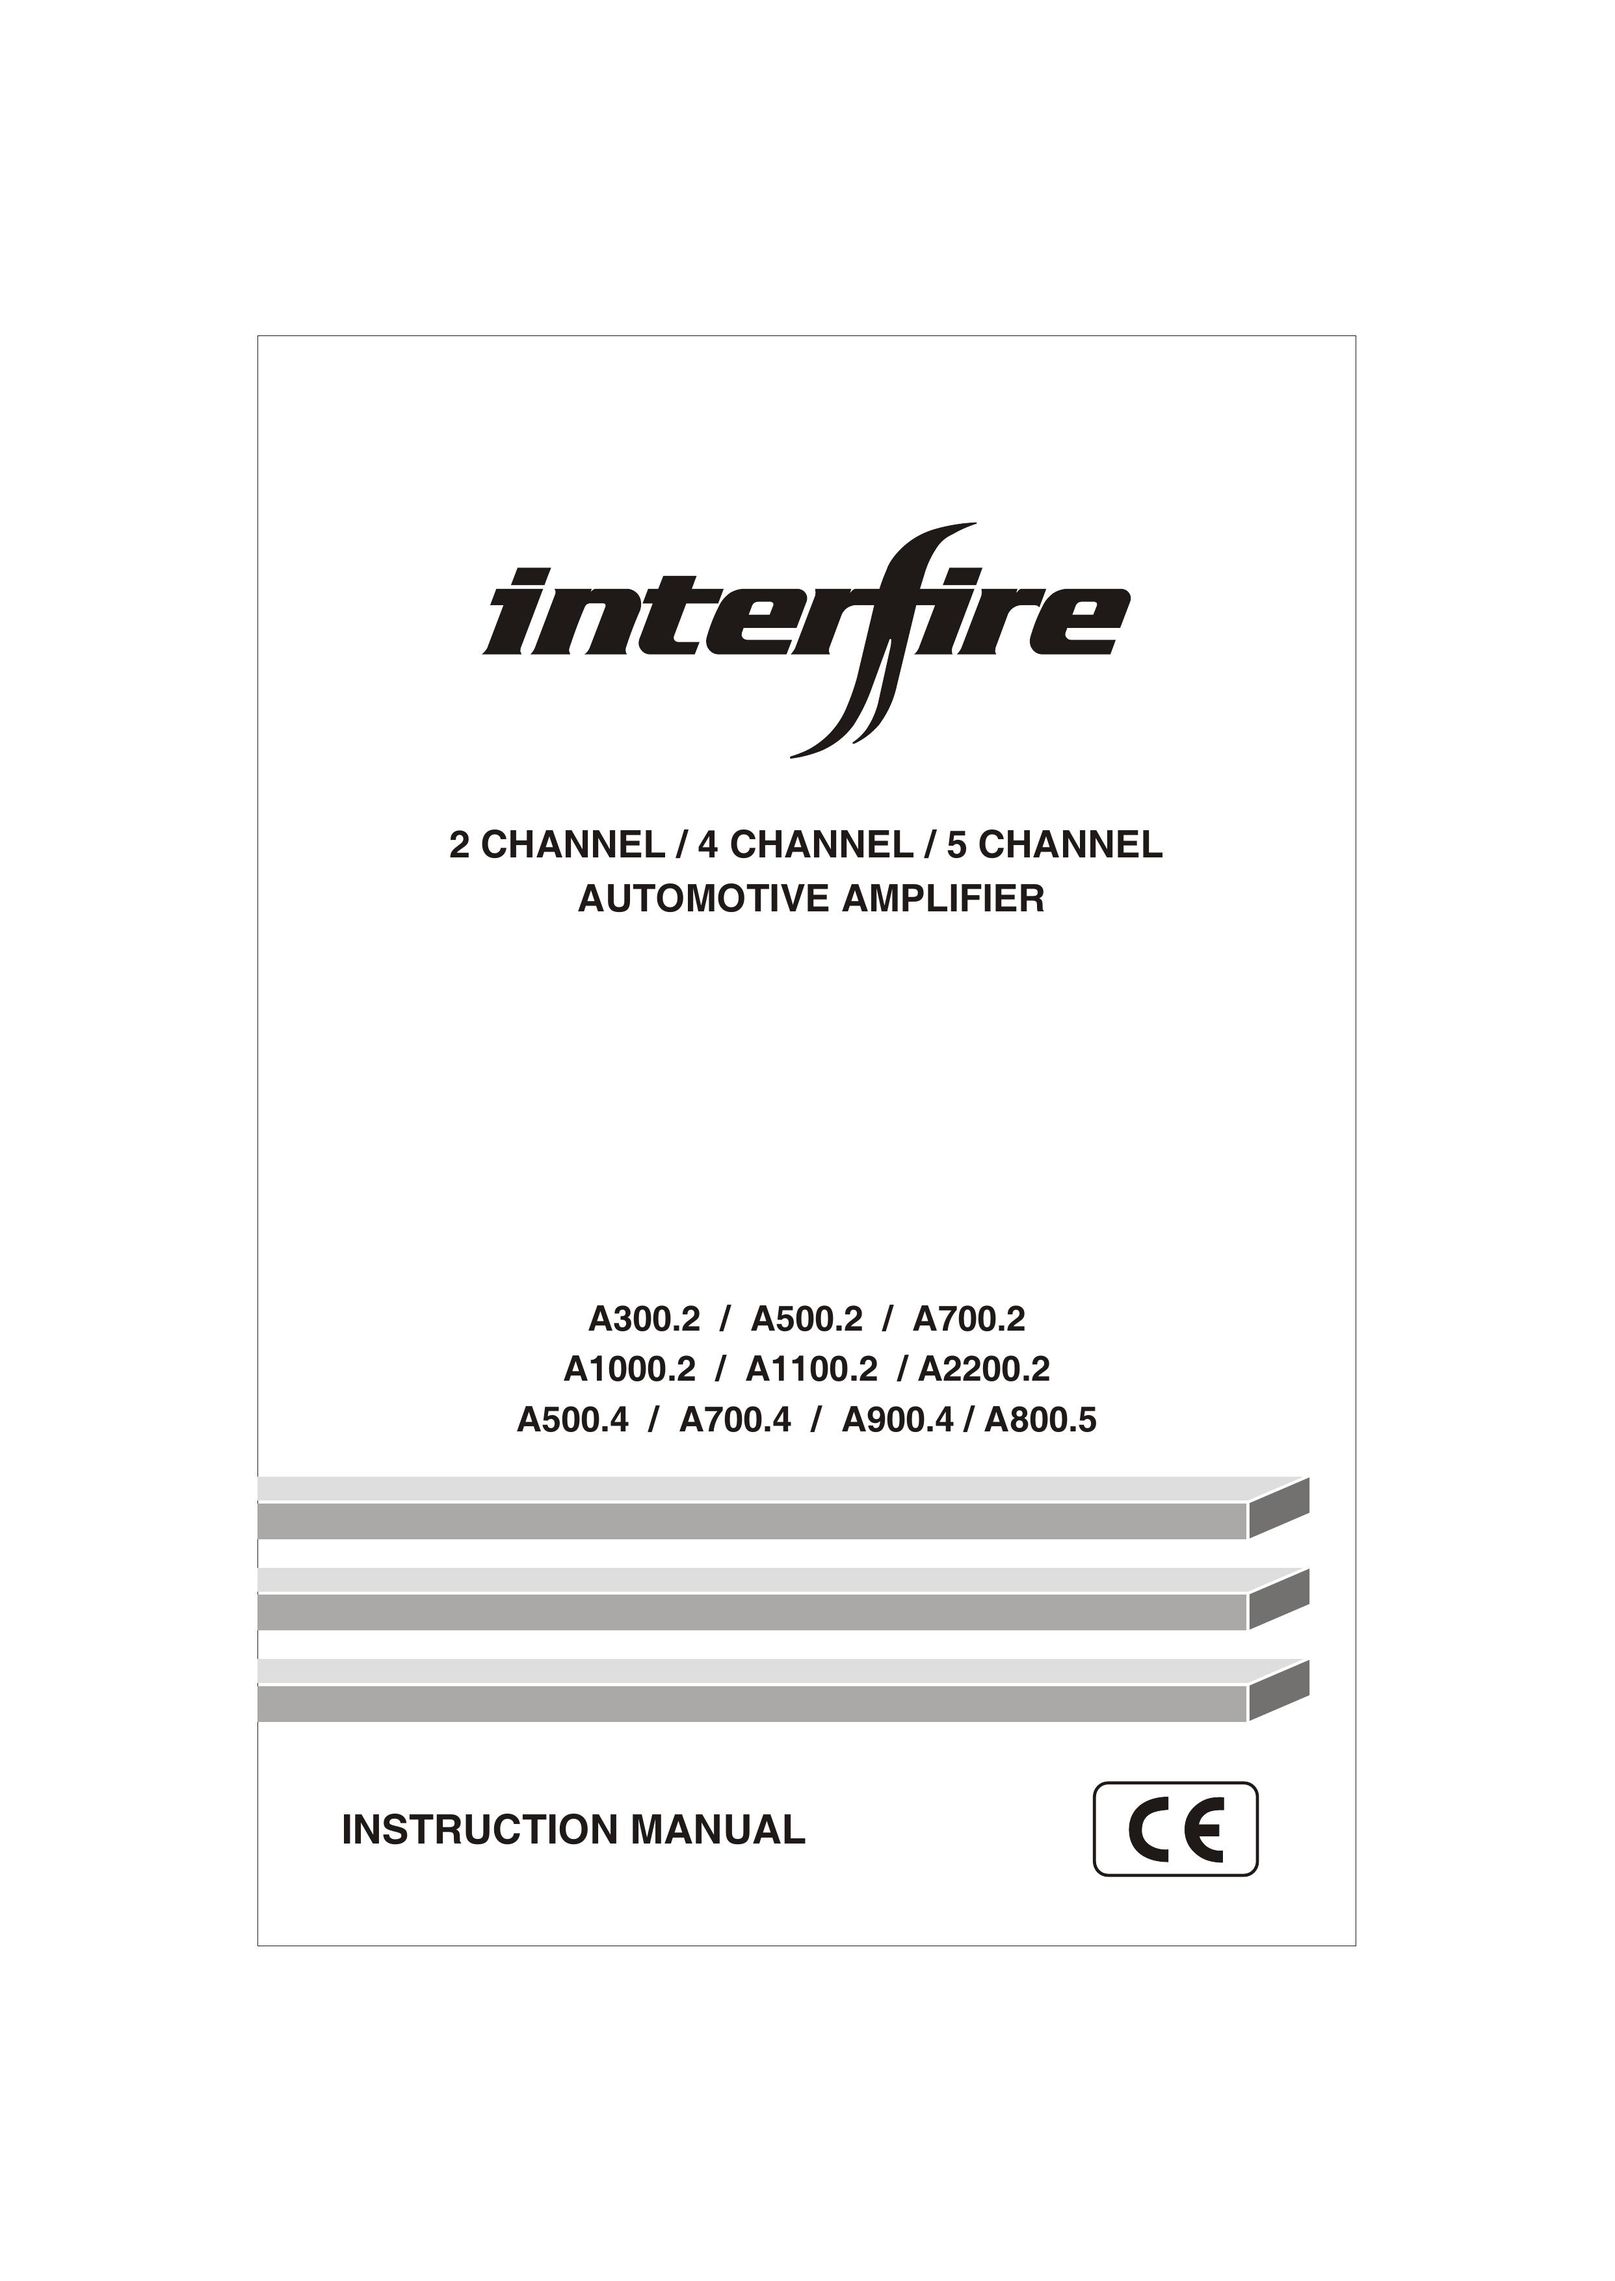 Interfire Audio A2200.2 Stereo Amplifier User Manual